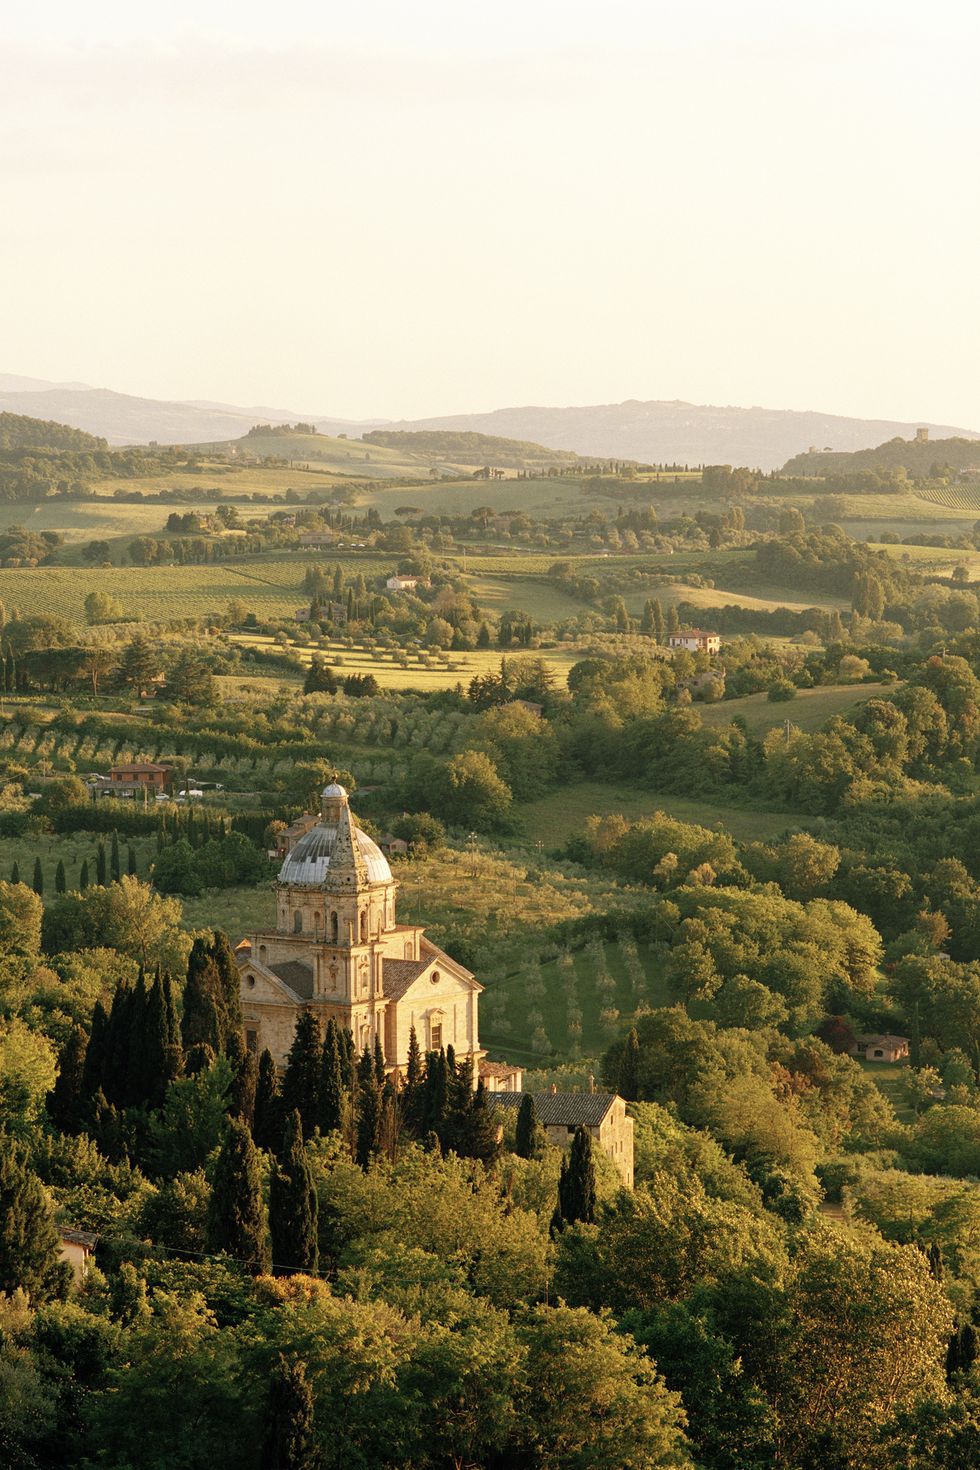 Most beautiful places in Italy